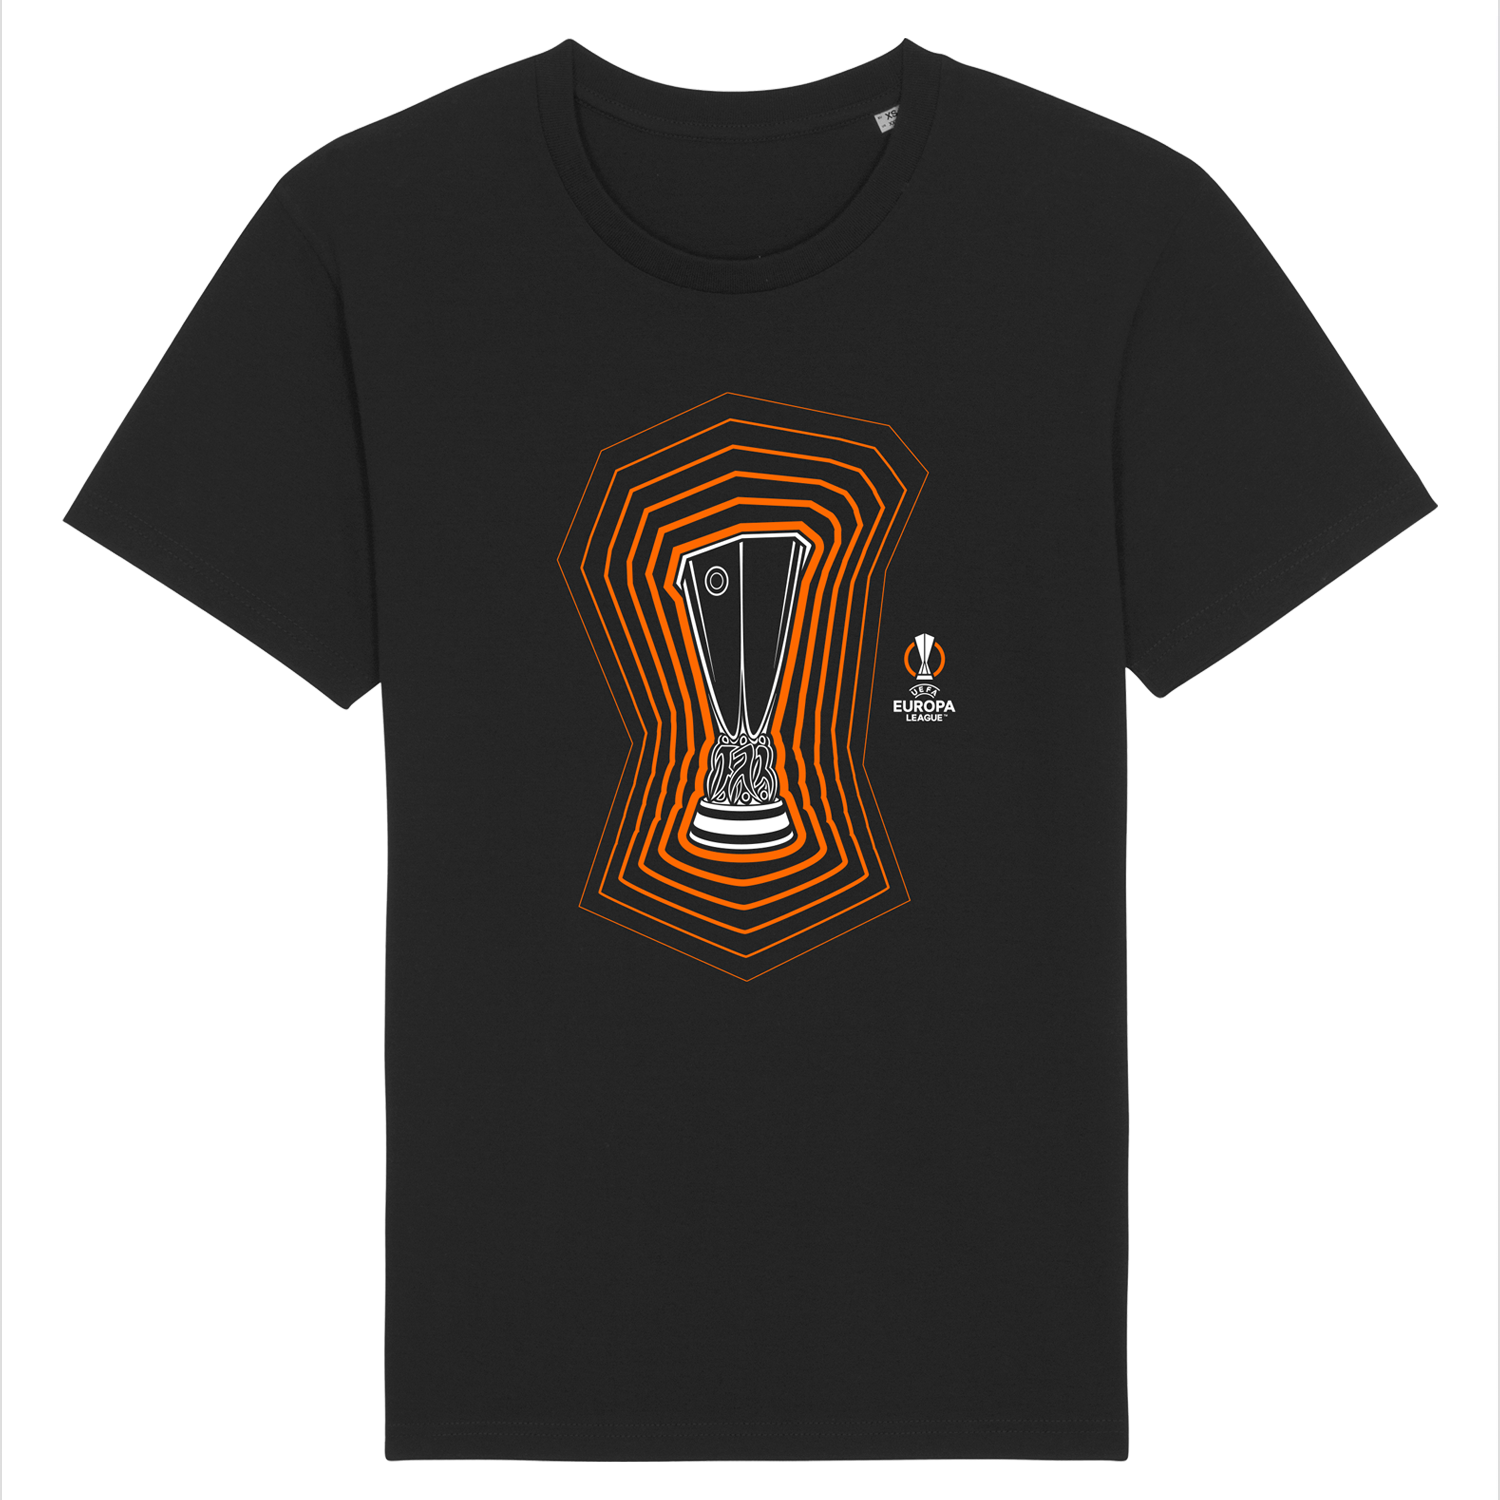 UEFA Europa League Club Competitions Online Store